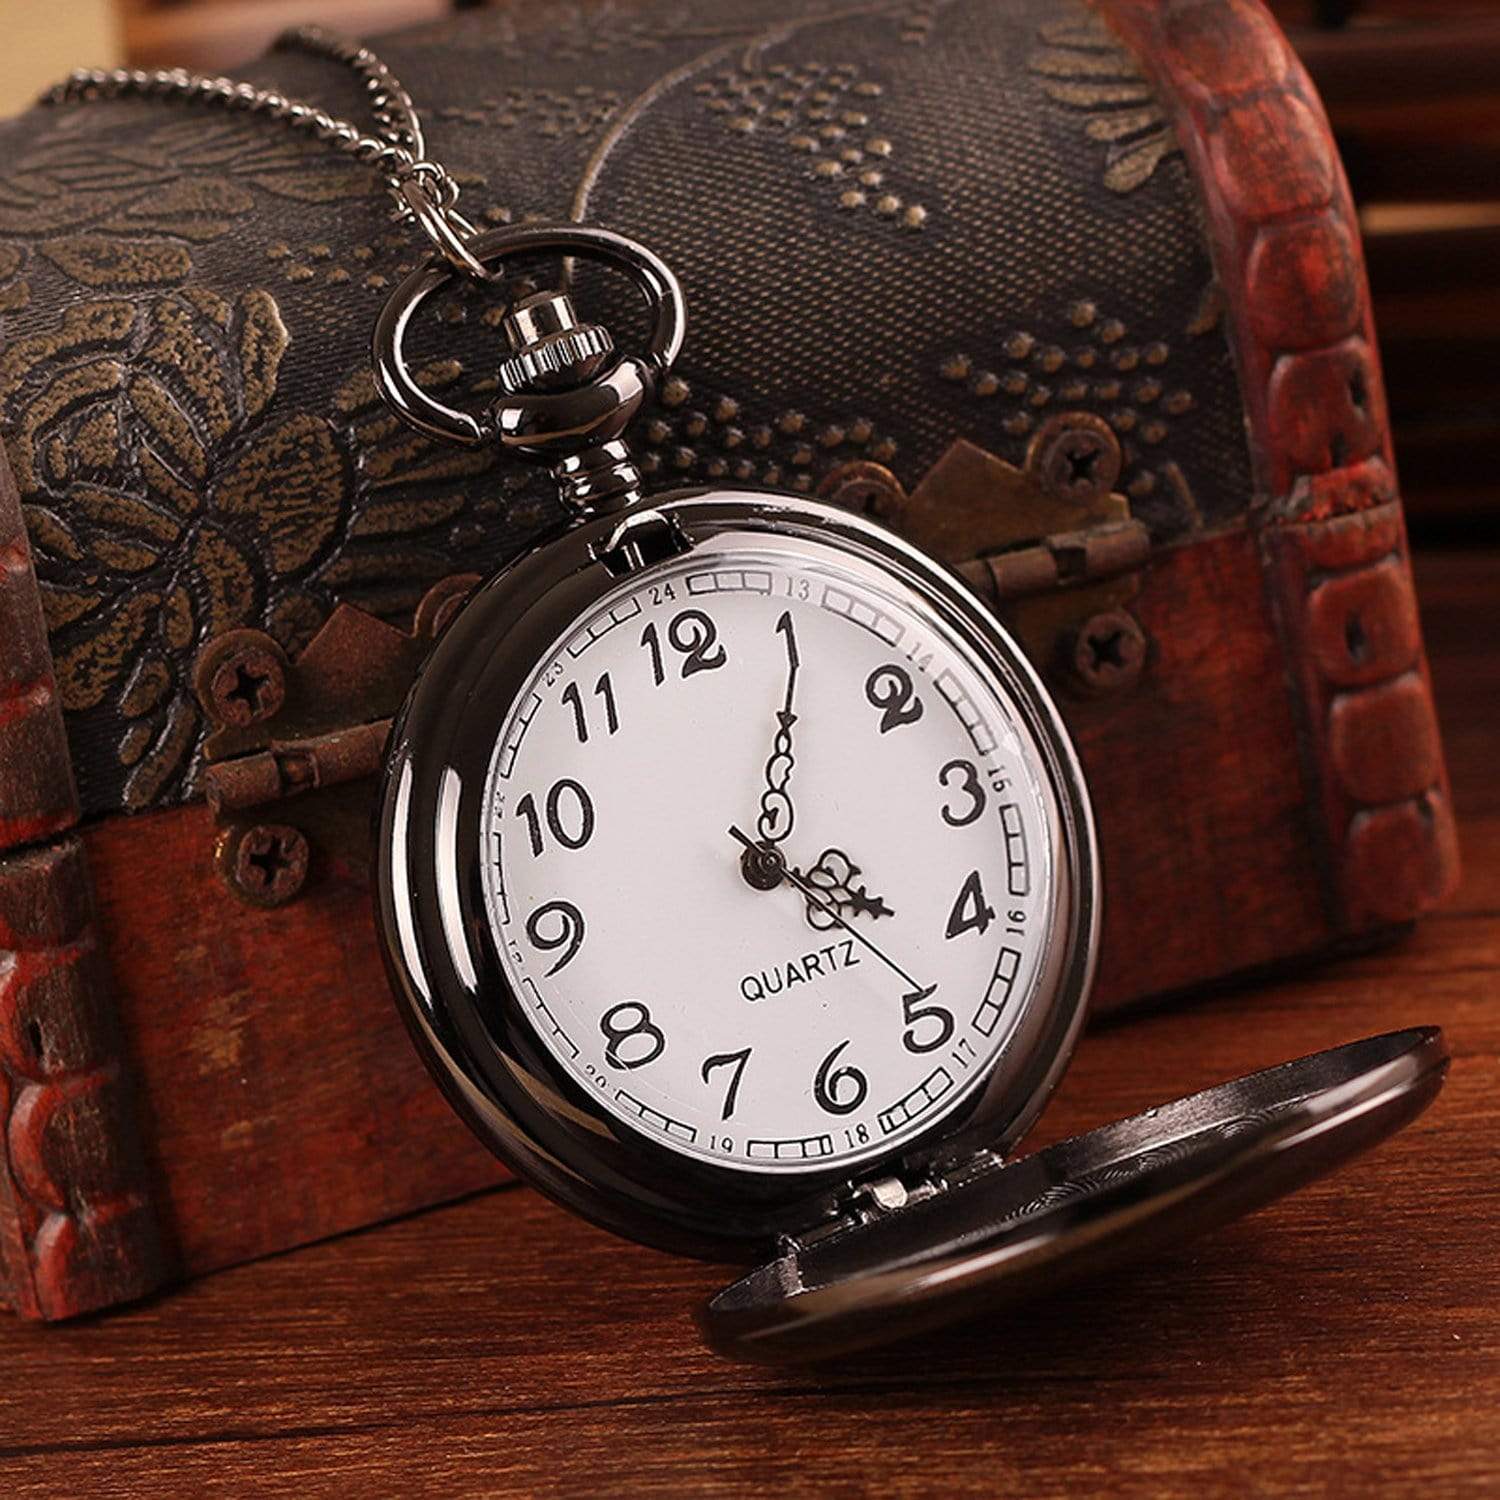 Pocket Watches To My Fiance - My Happily Ever After Pocket Watch GiveMe-Gifts